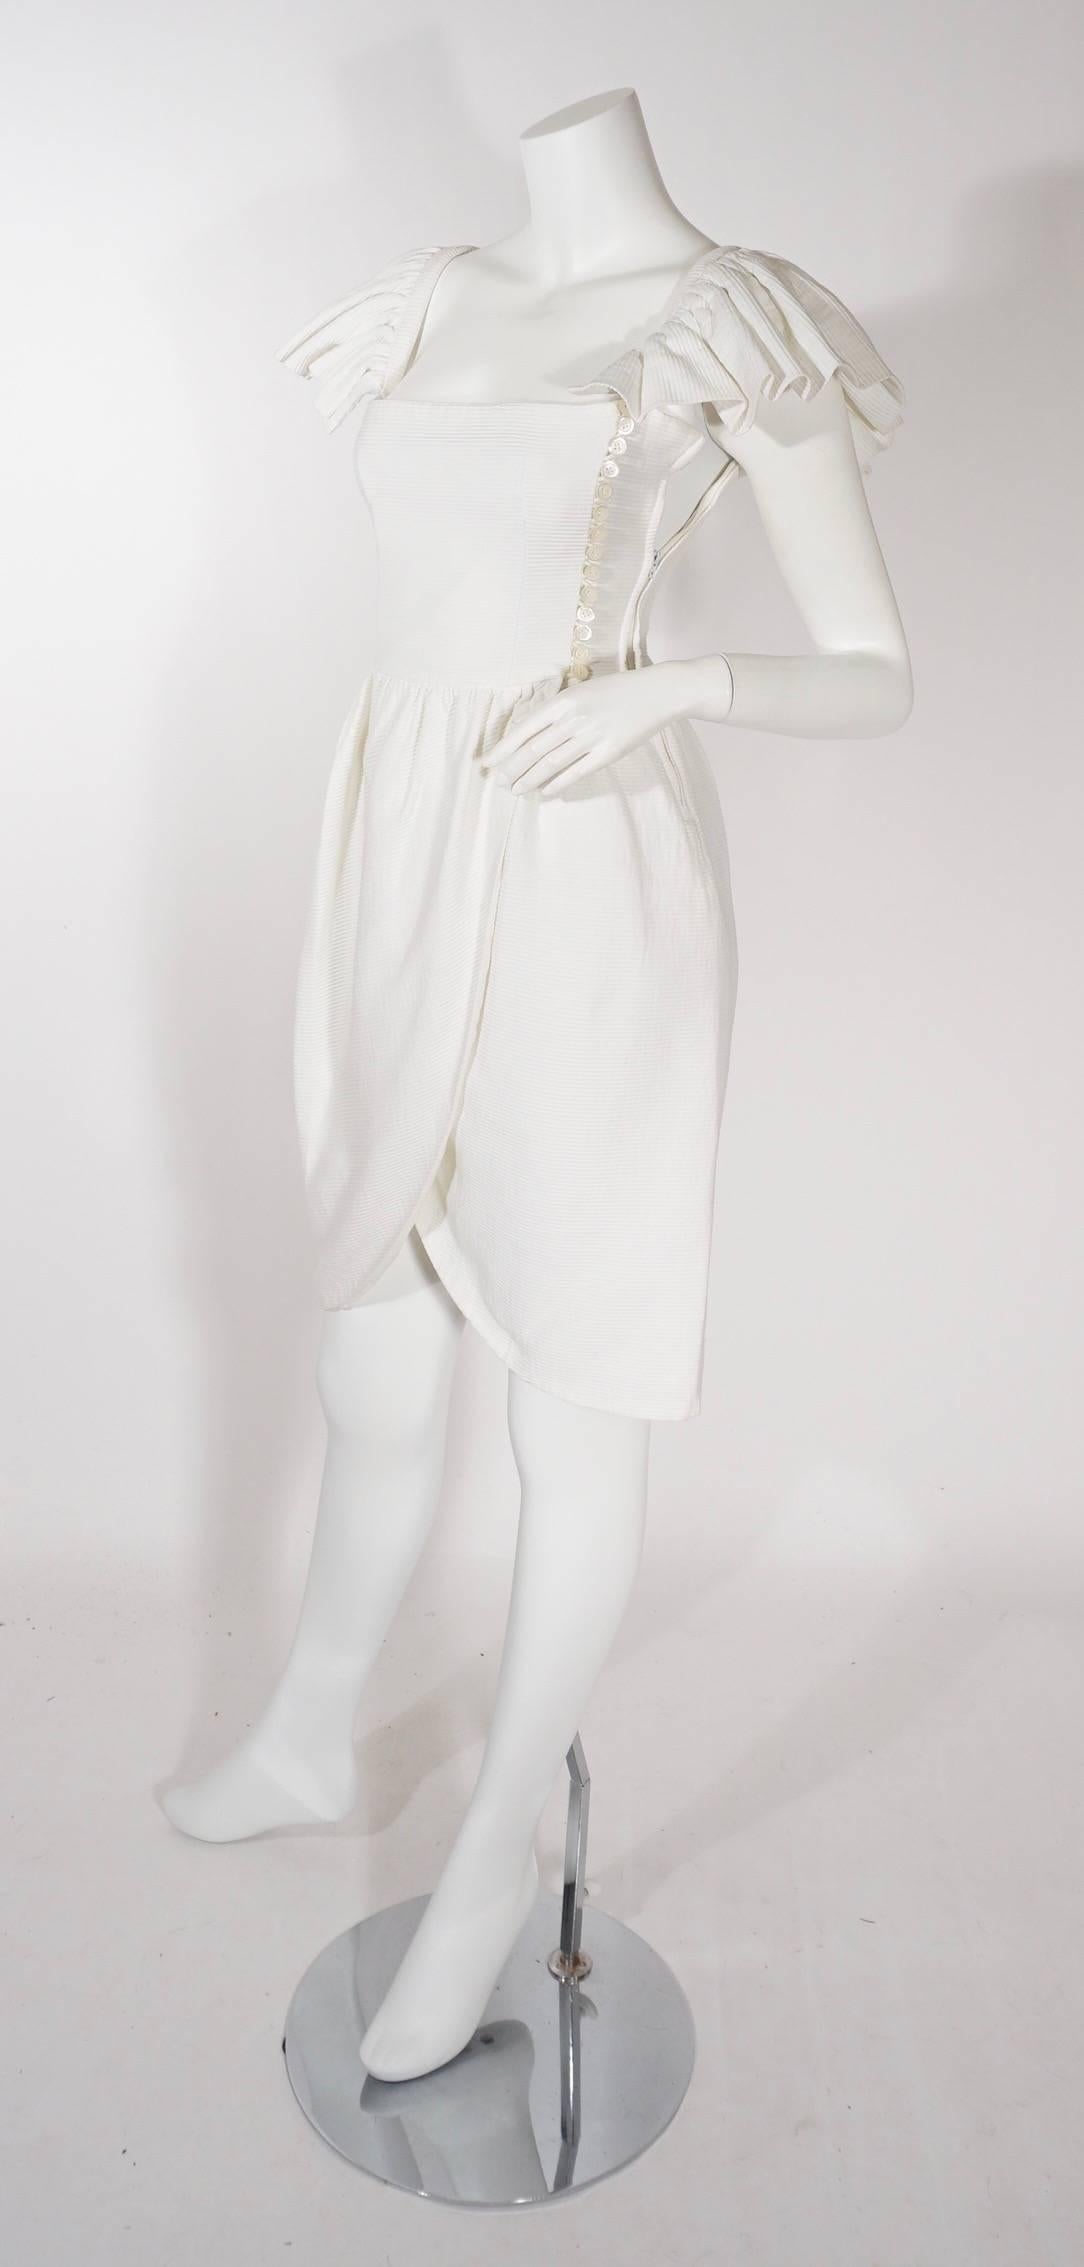 Lanvin white ribbed dress, Circa 1990's. This feminine design features ruffled capped sleeves, buttons along the bust to waist side line, and open skirt hemline. Extremely flattering and timeless. Excellent condition.